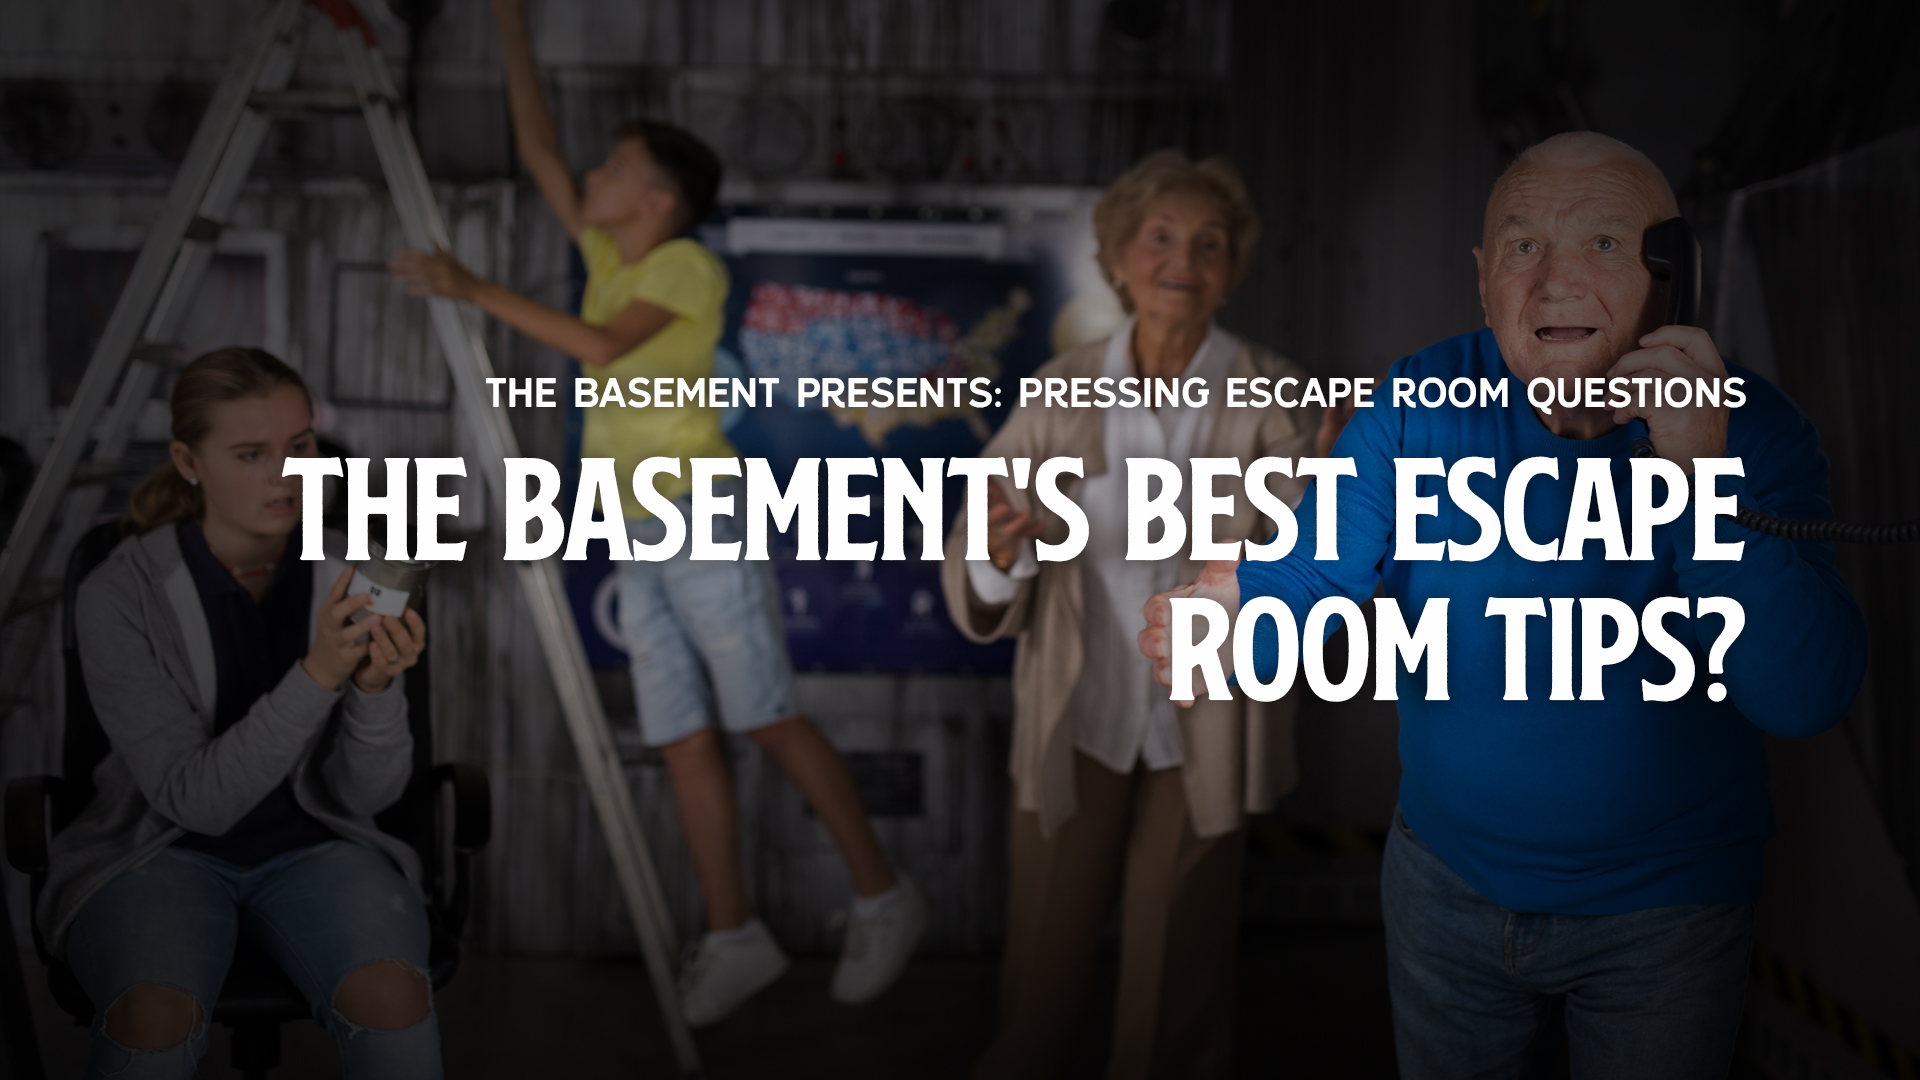 The Basement's Best Escape Room Tips